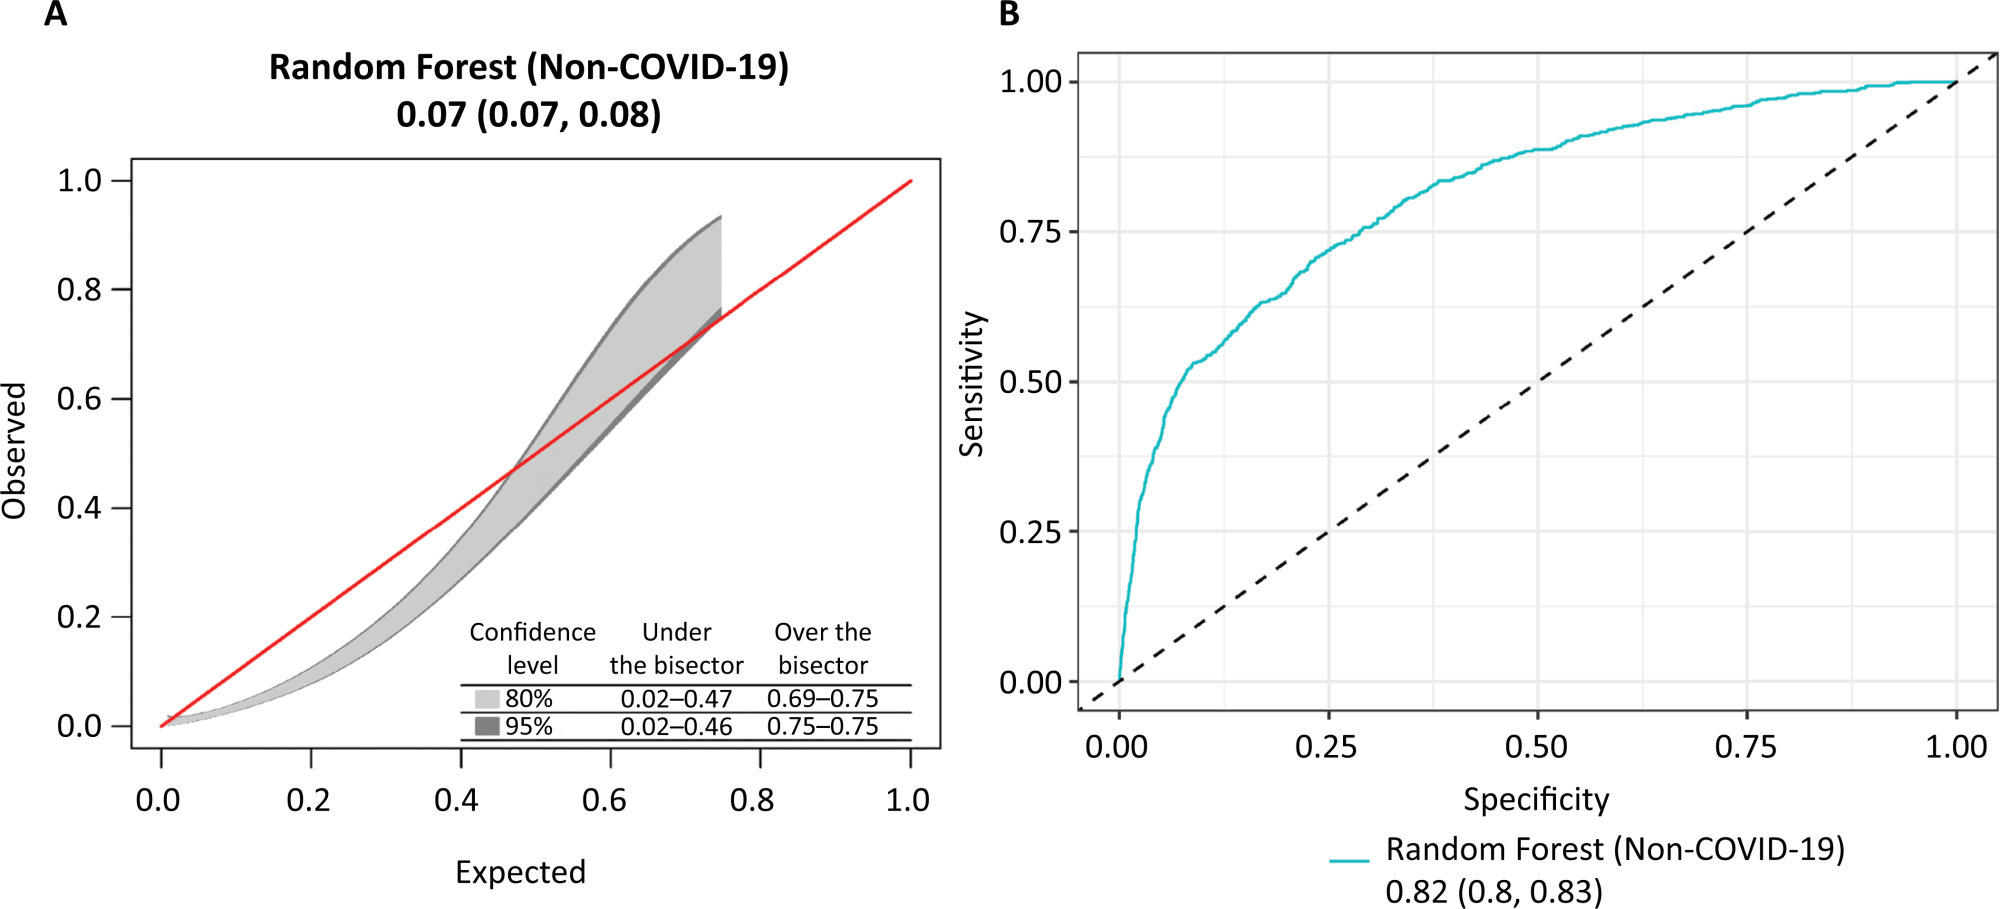 Generalizing the application of machine learning predictive models across different populations: does a model to predict the use of renal replacement therapy in critically ill COVID-19 patients apply to general intensive care unit patients?